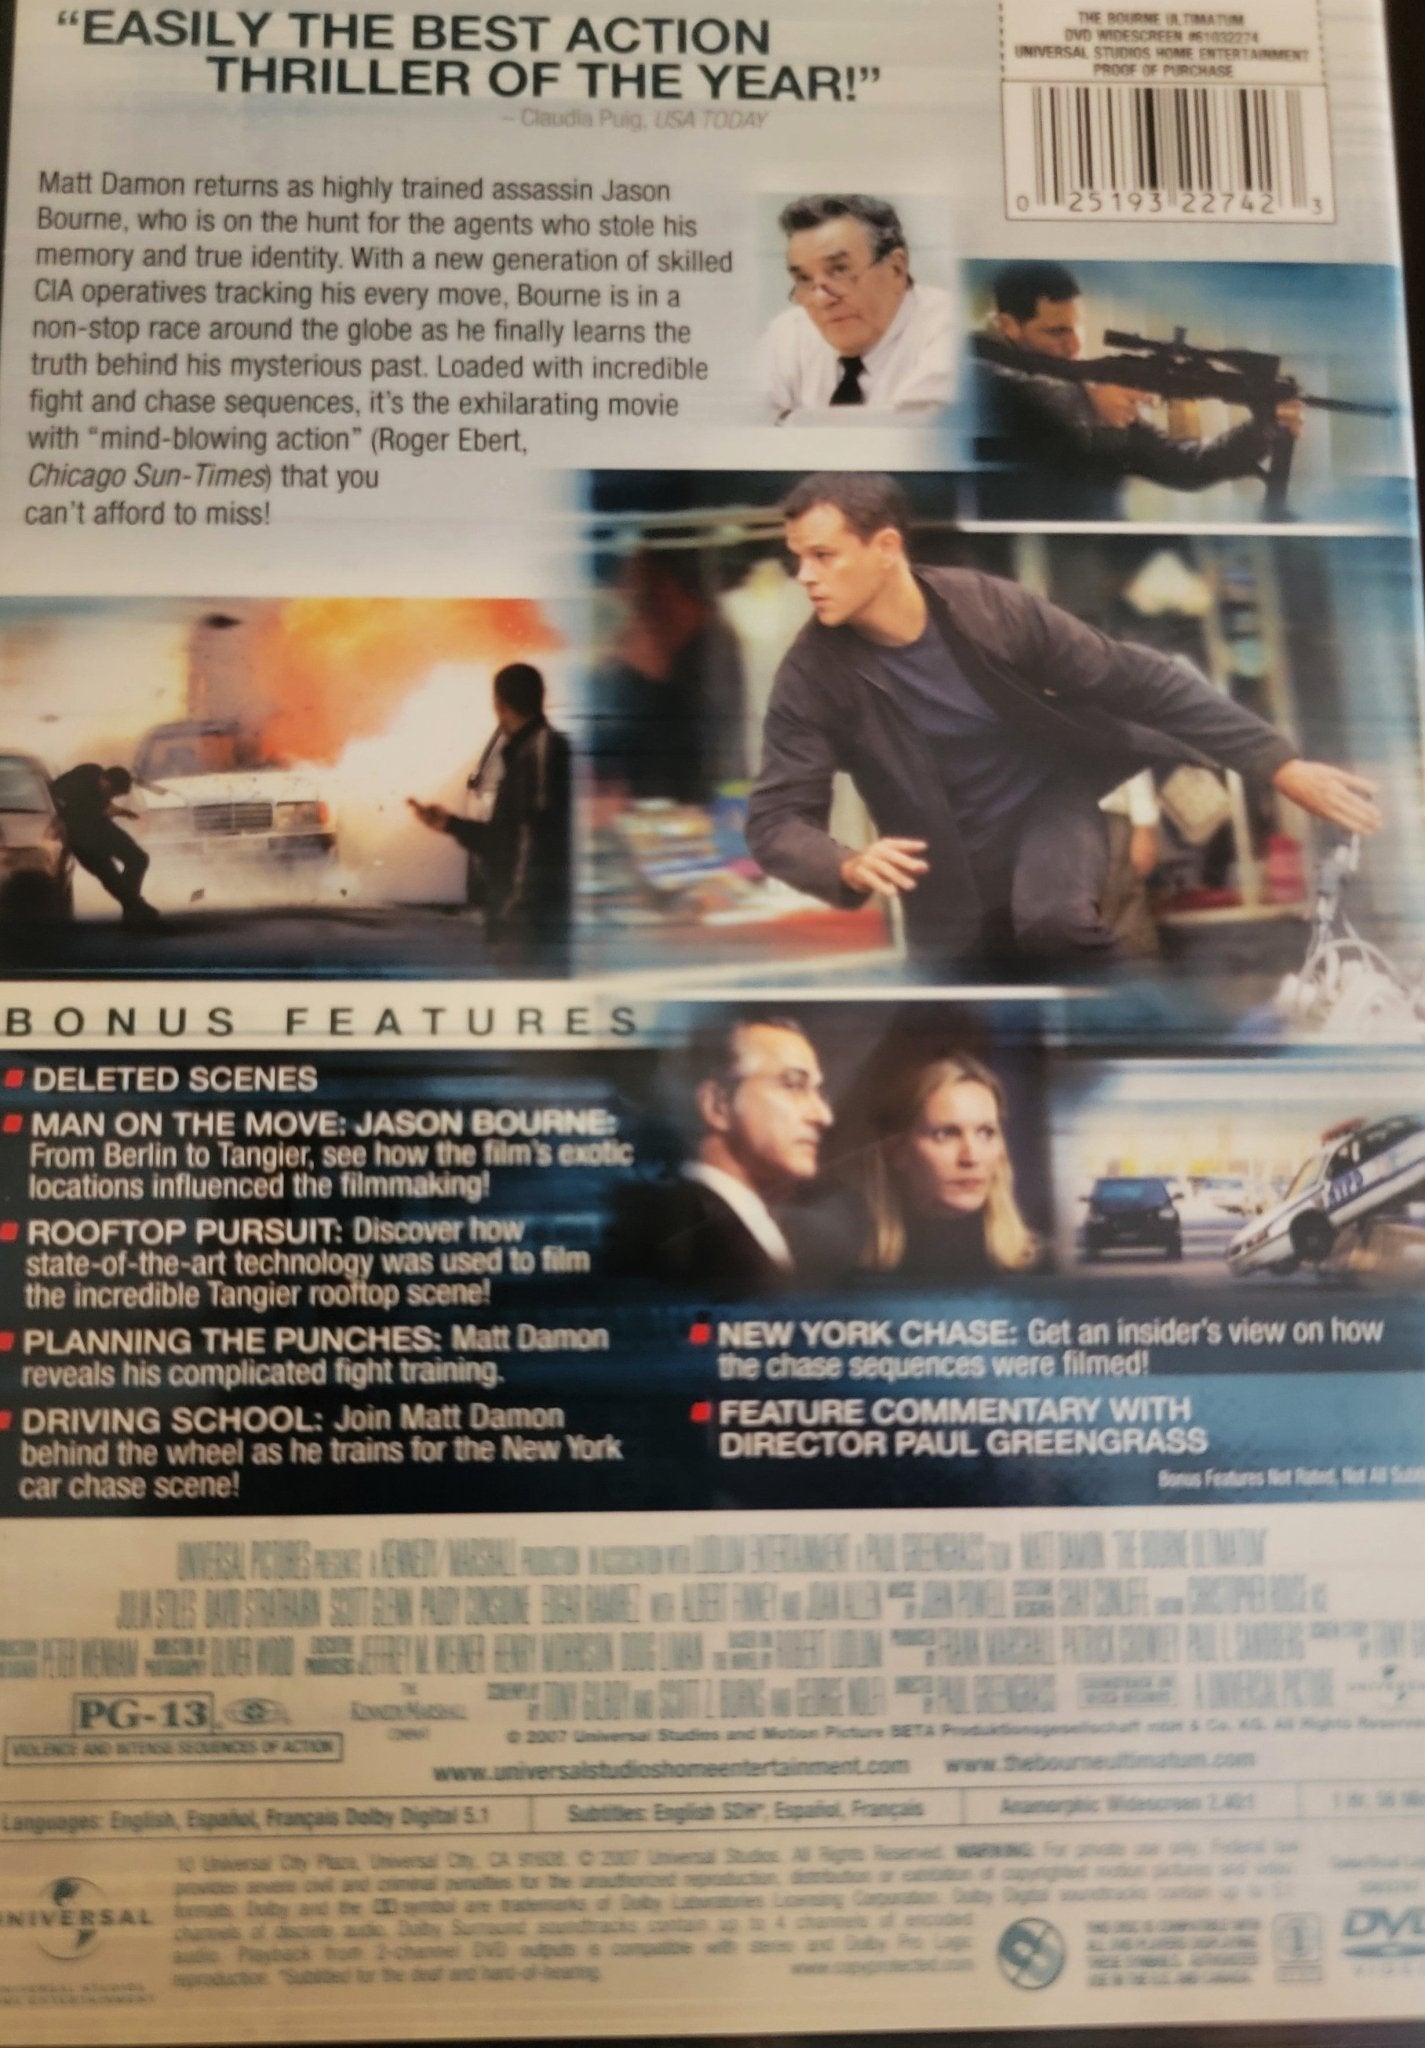 Universal Pictures Home Entertainment - The Bourne Ultimatum | DVD | Widescreen - DVD - Steady Bunny Shop